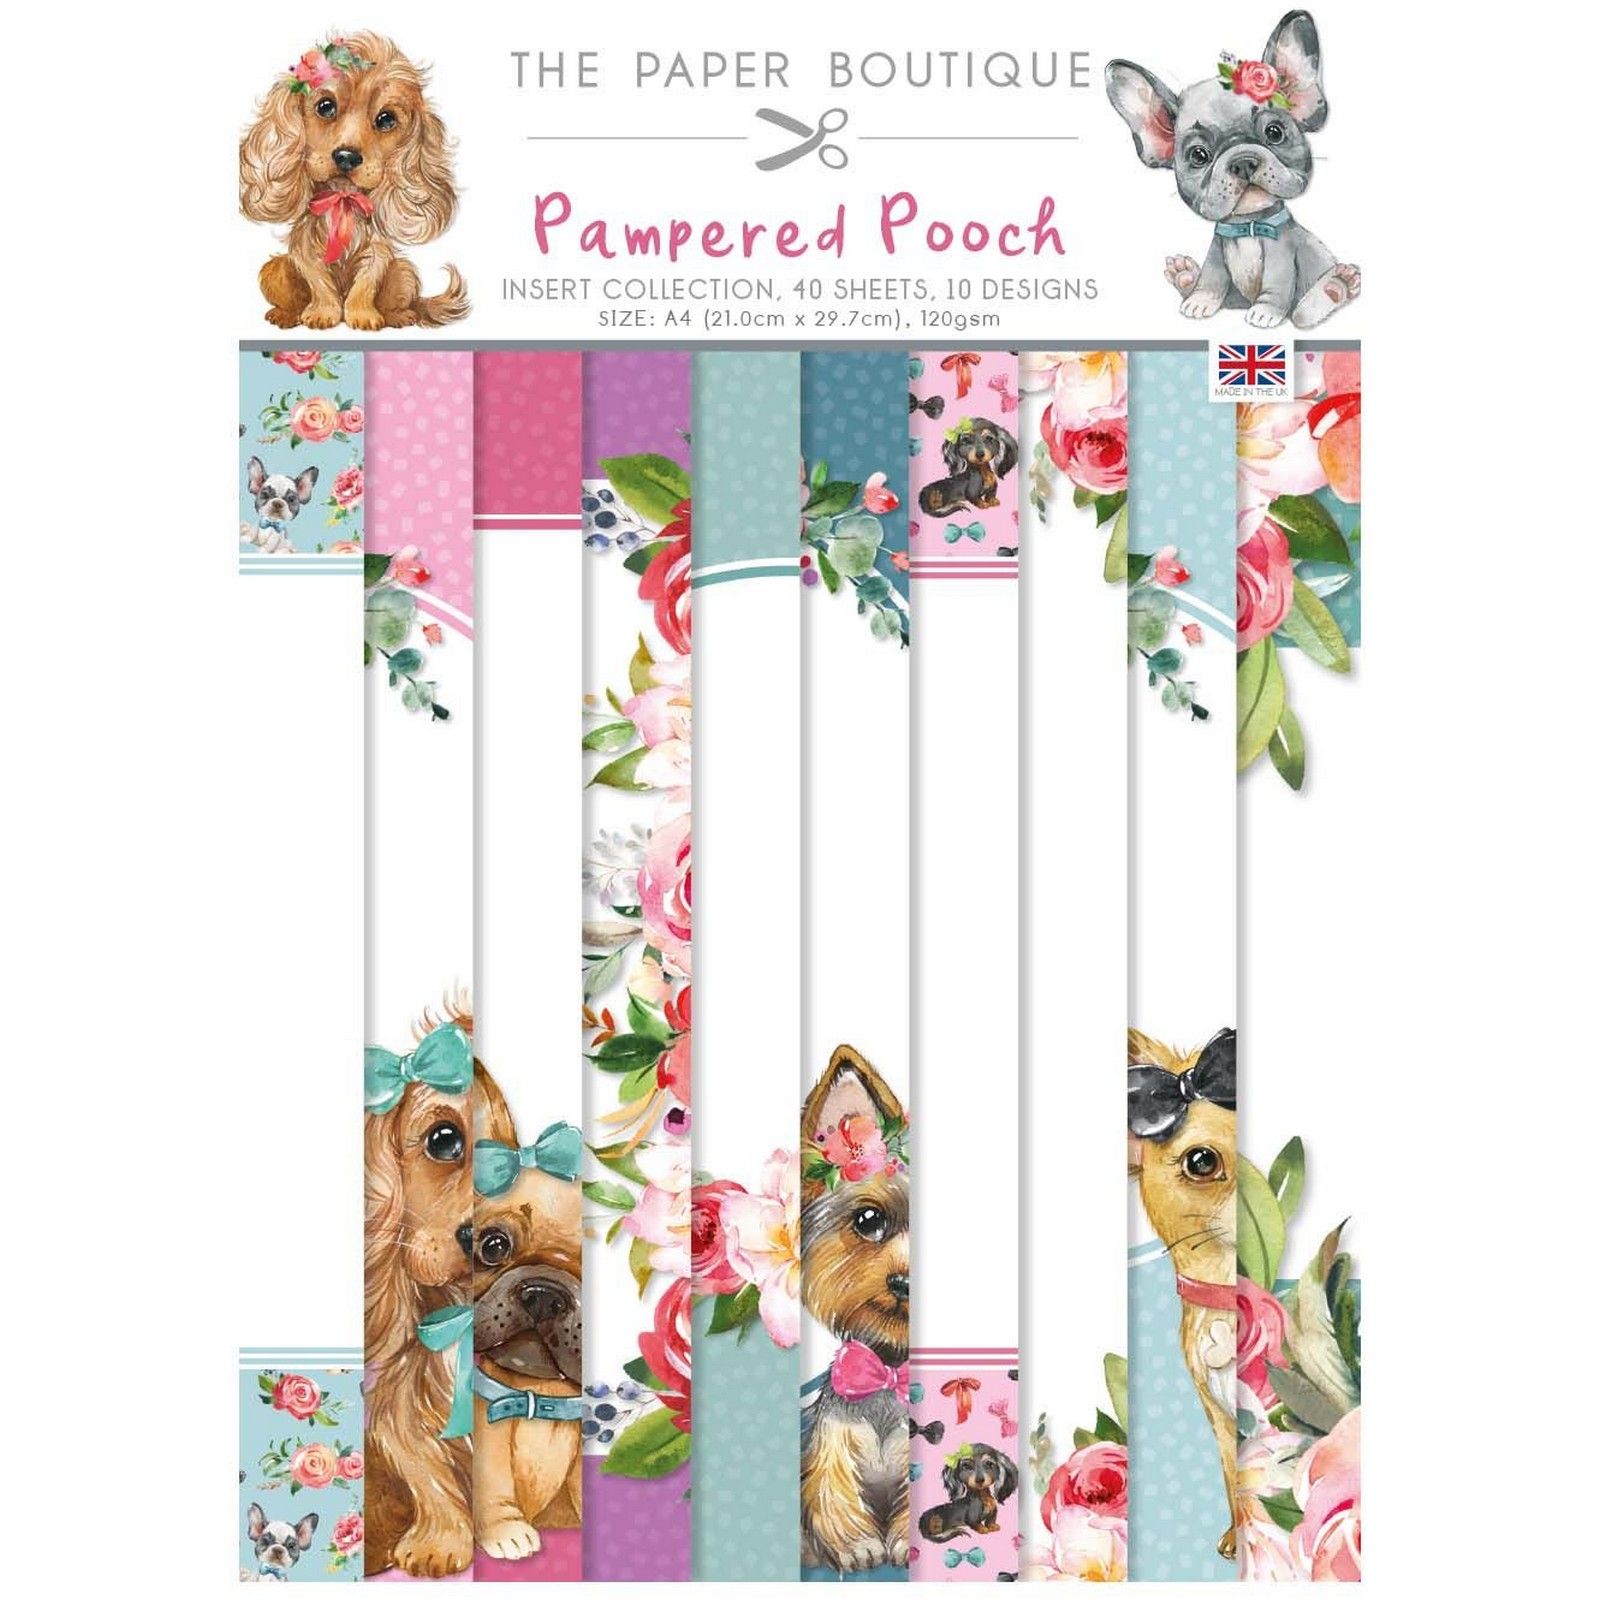 The Paper Boutique • Pampered Pooch Insert Collection